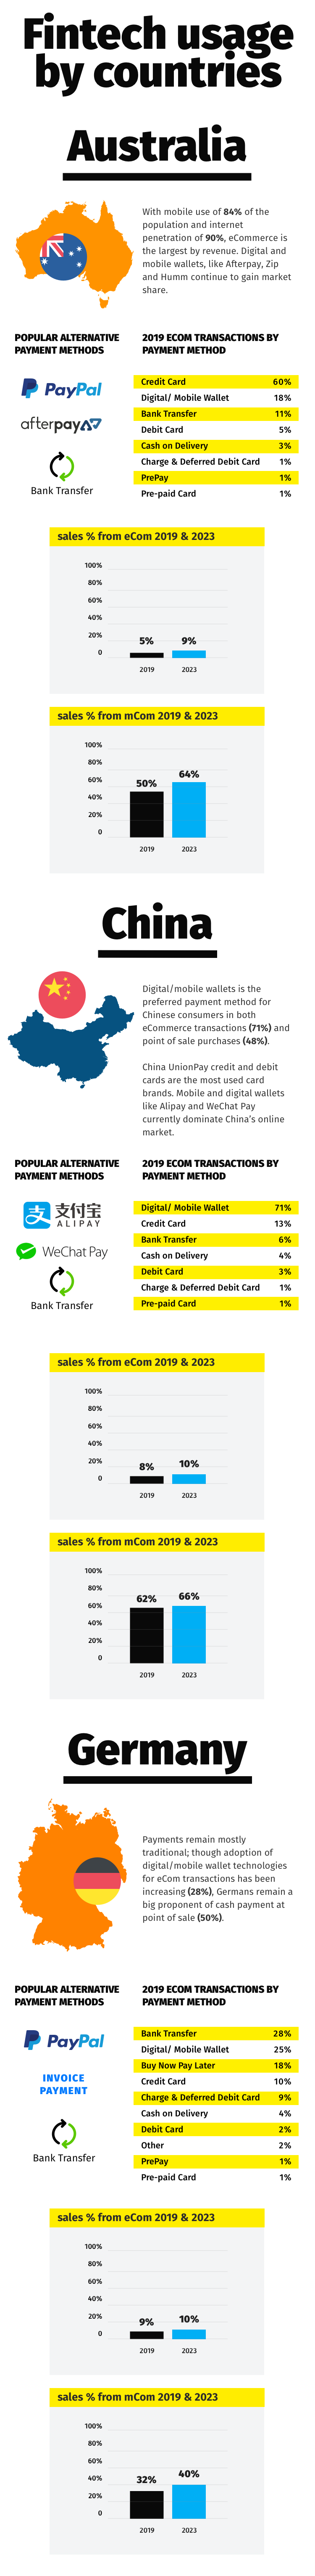 Infographic: Fintech Overview and Trends 2021 - 2024 - 25